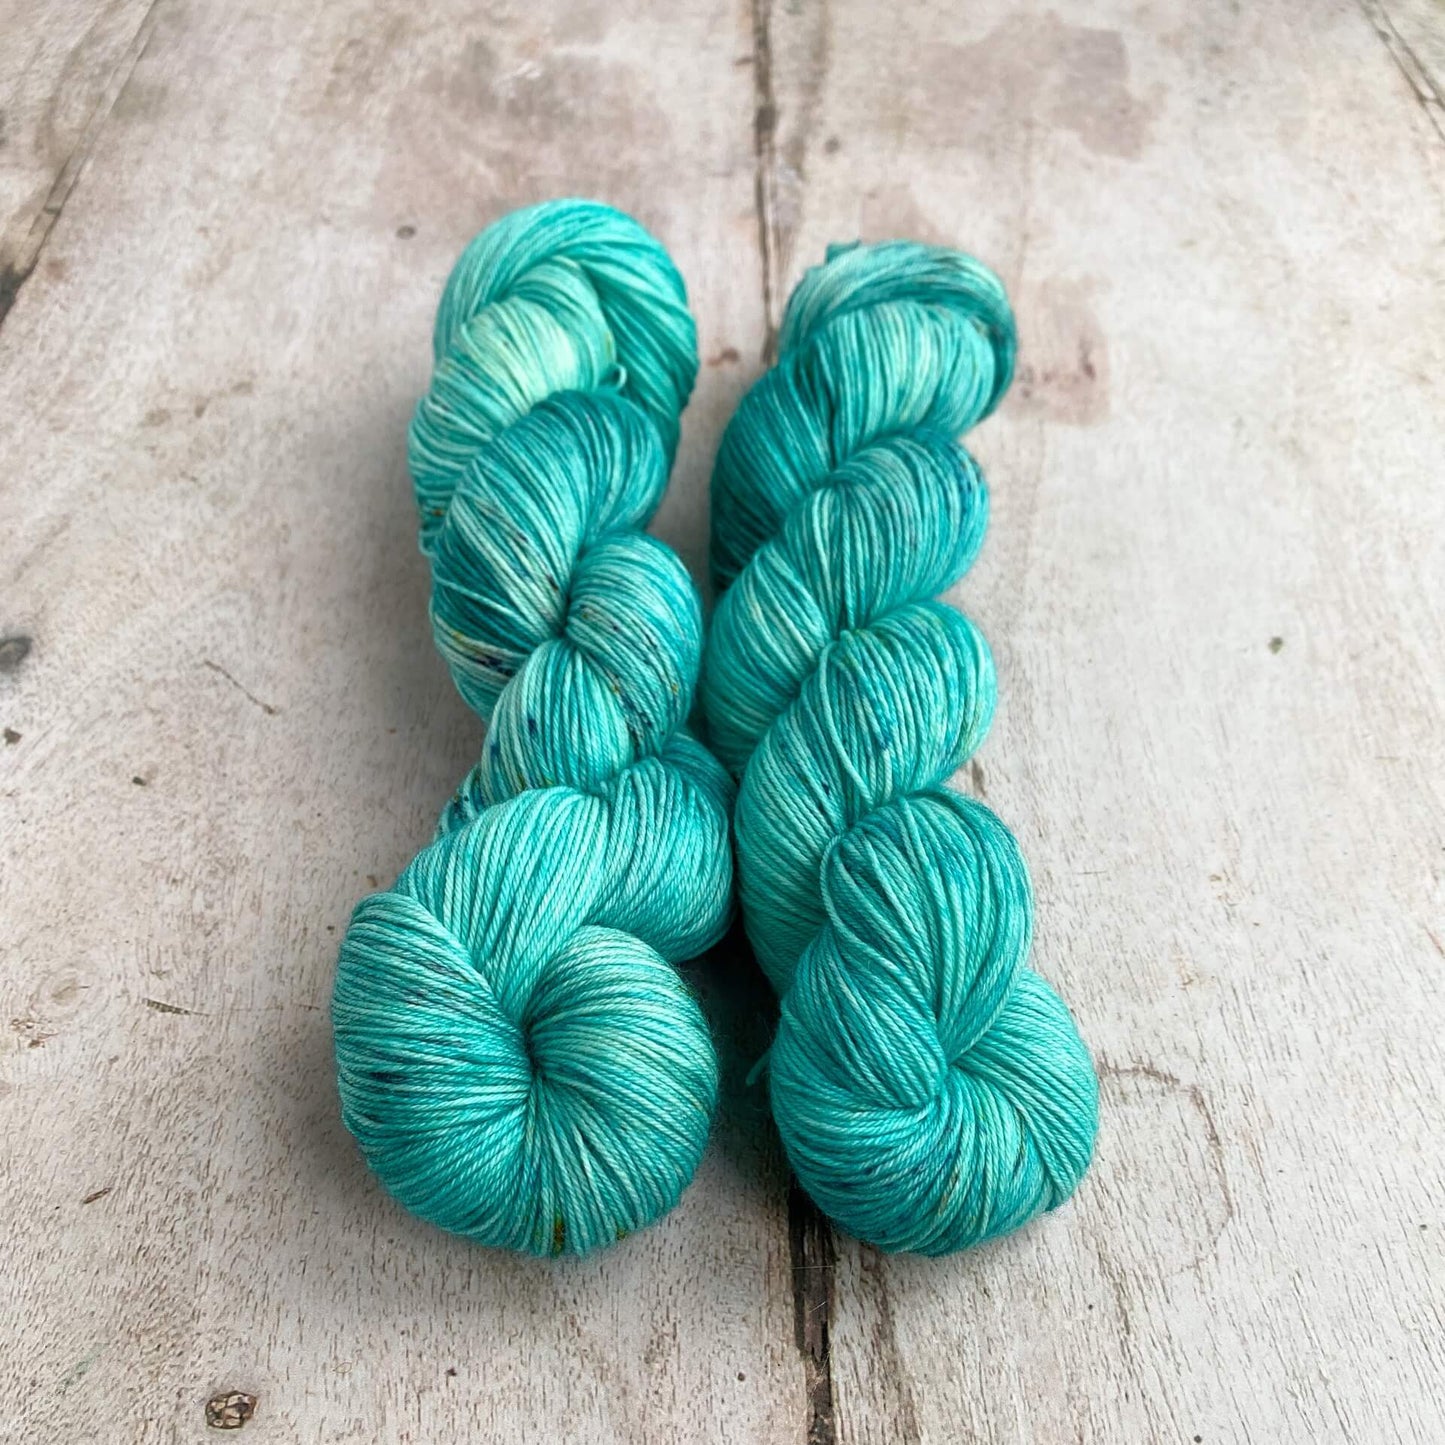 Two skeins of hand dyed yarn sit on a wooden table. They are dyed with an aqua blue dye and have slight sprinkles added for interest. 